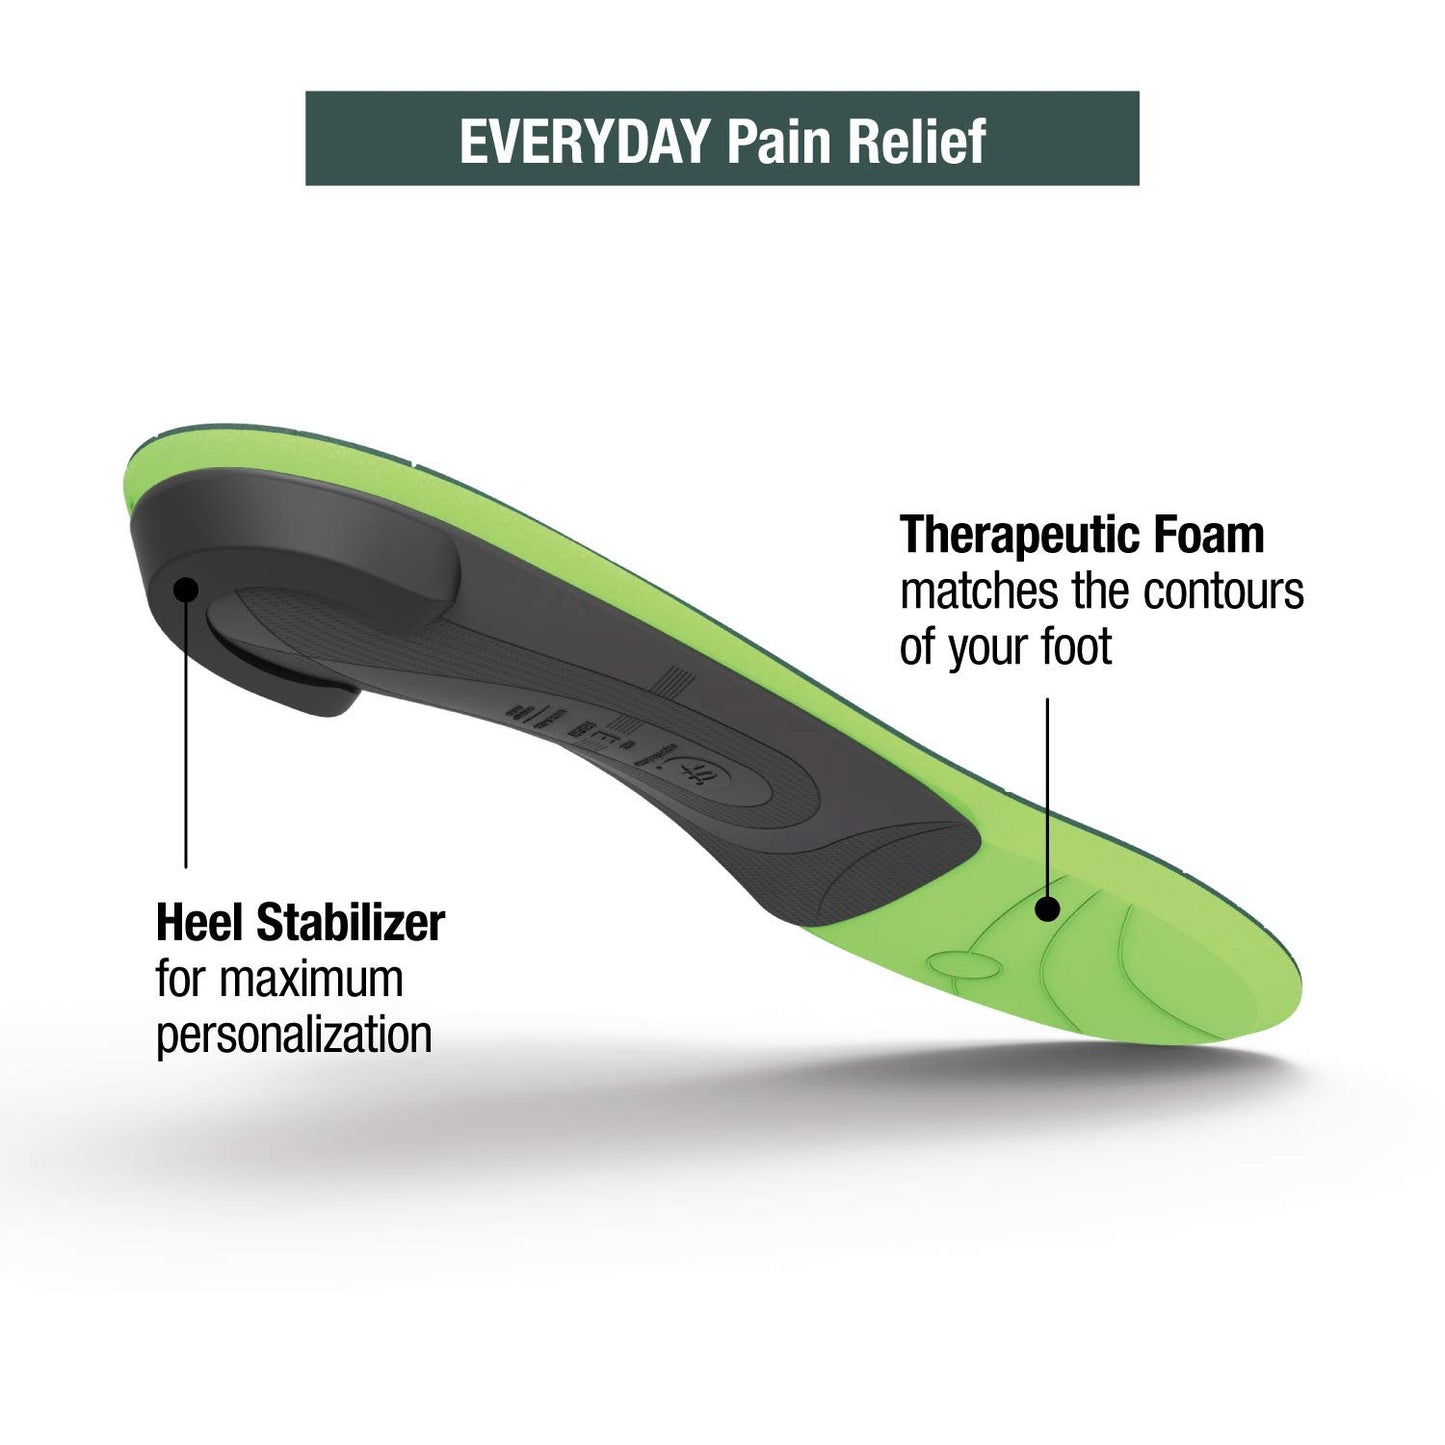 Superfeet Everyday Pain Relief Insoles